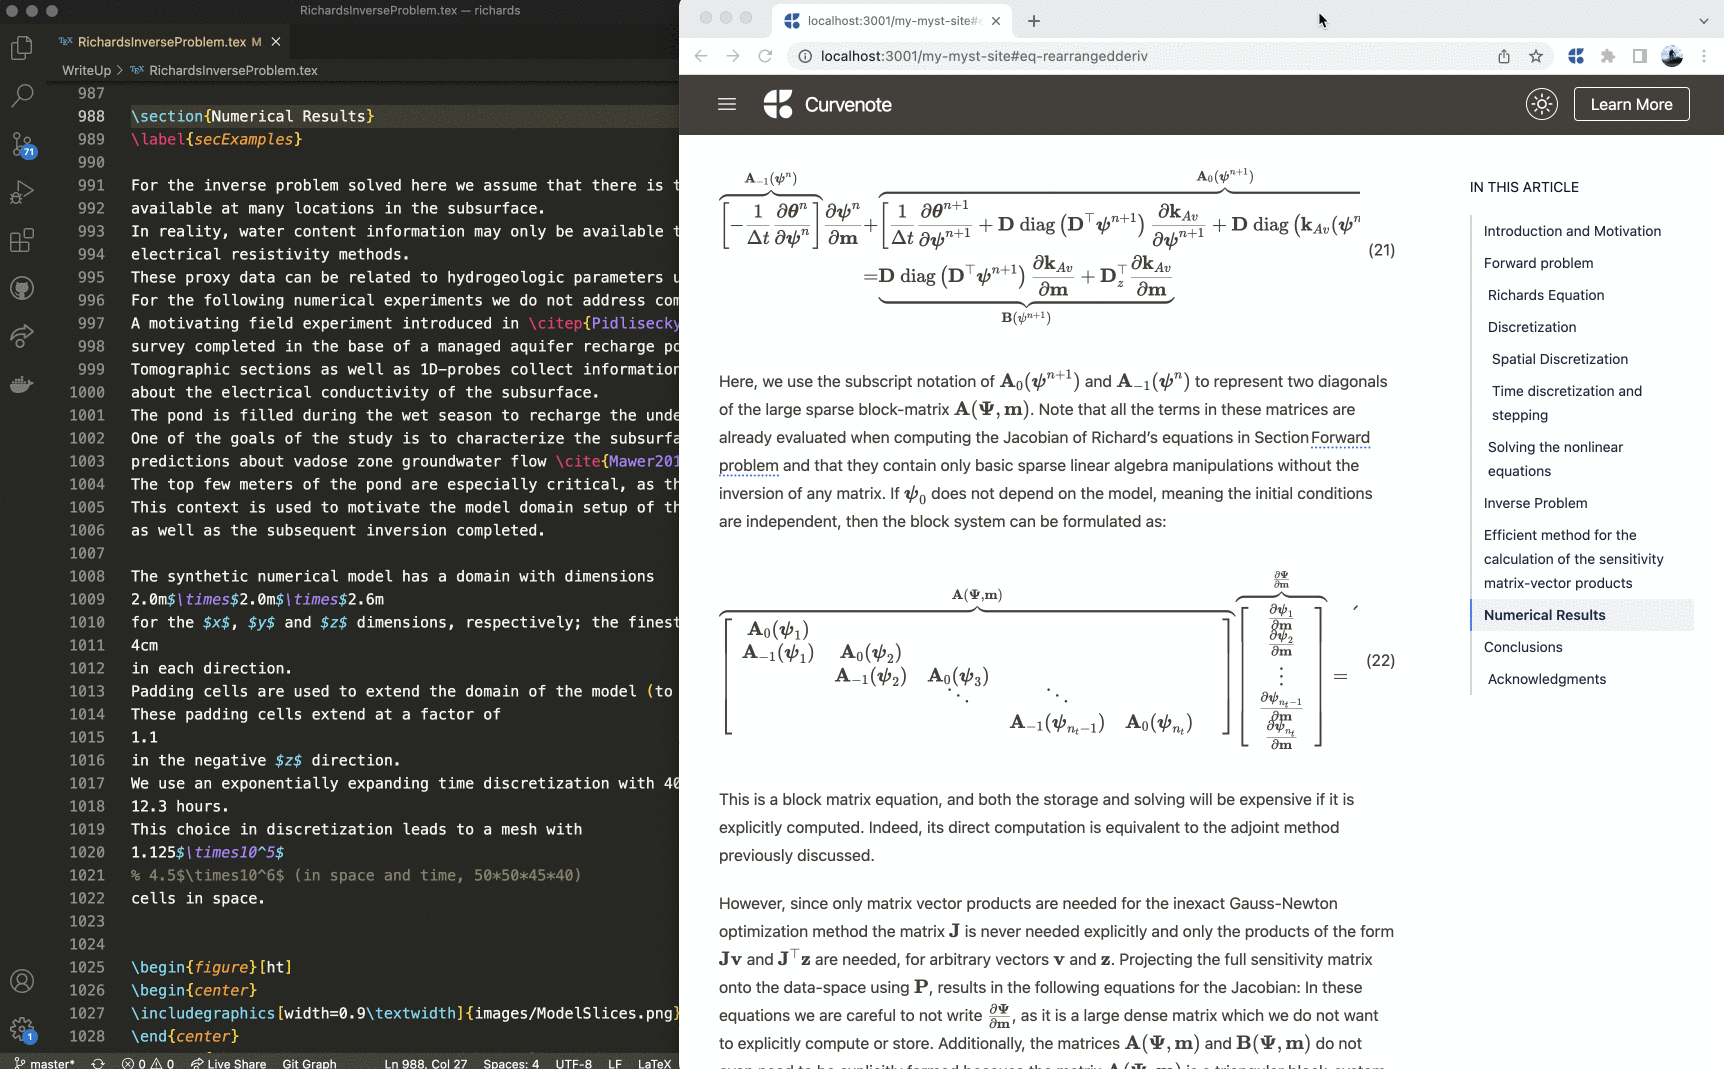 Parsing and rendering \LaTeX in MyST as an interactive website.